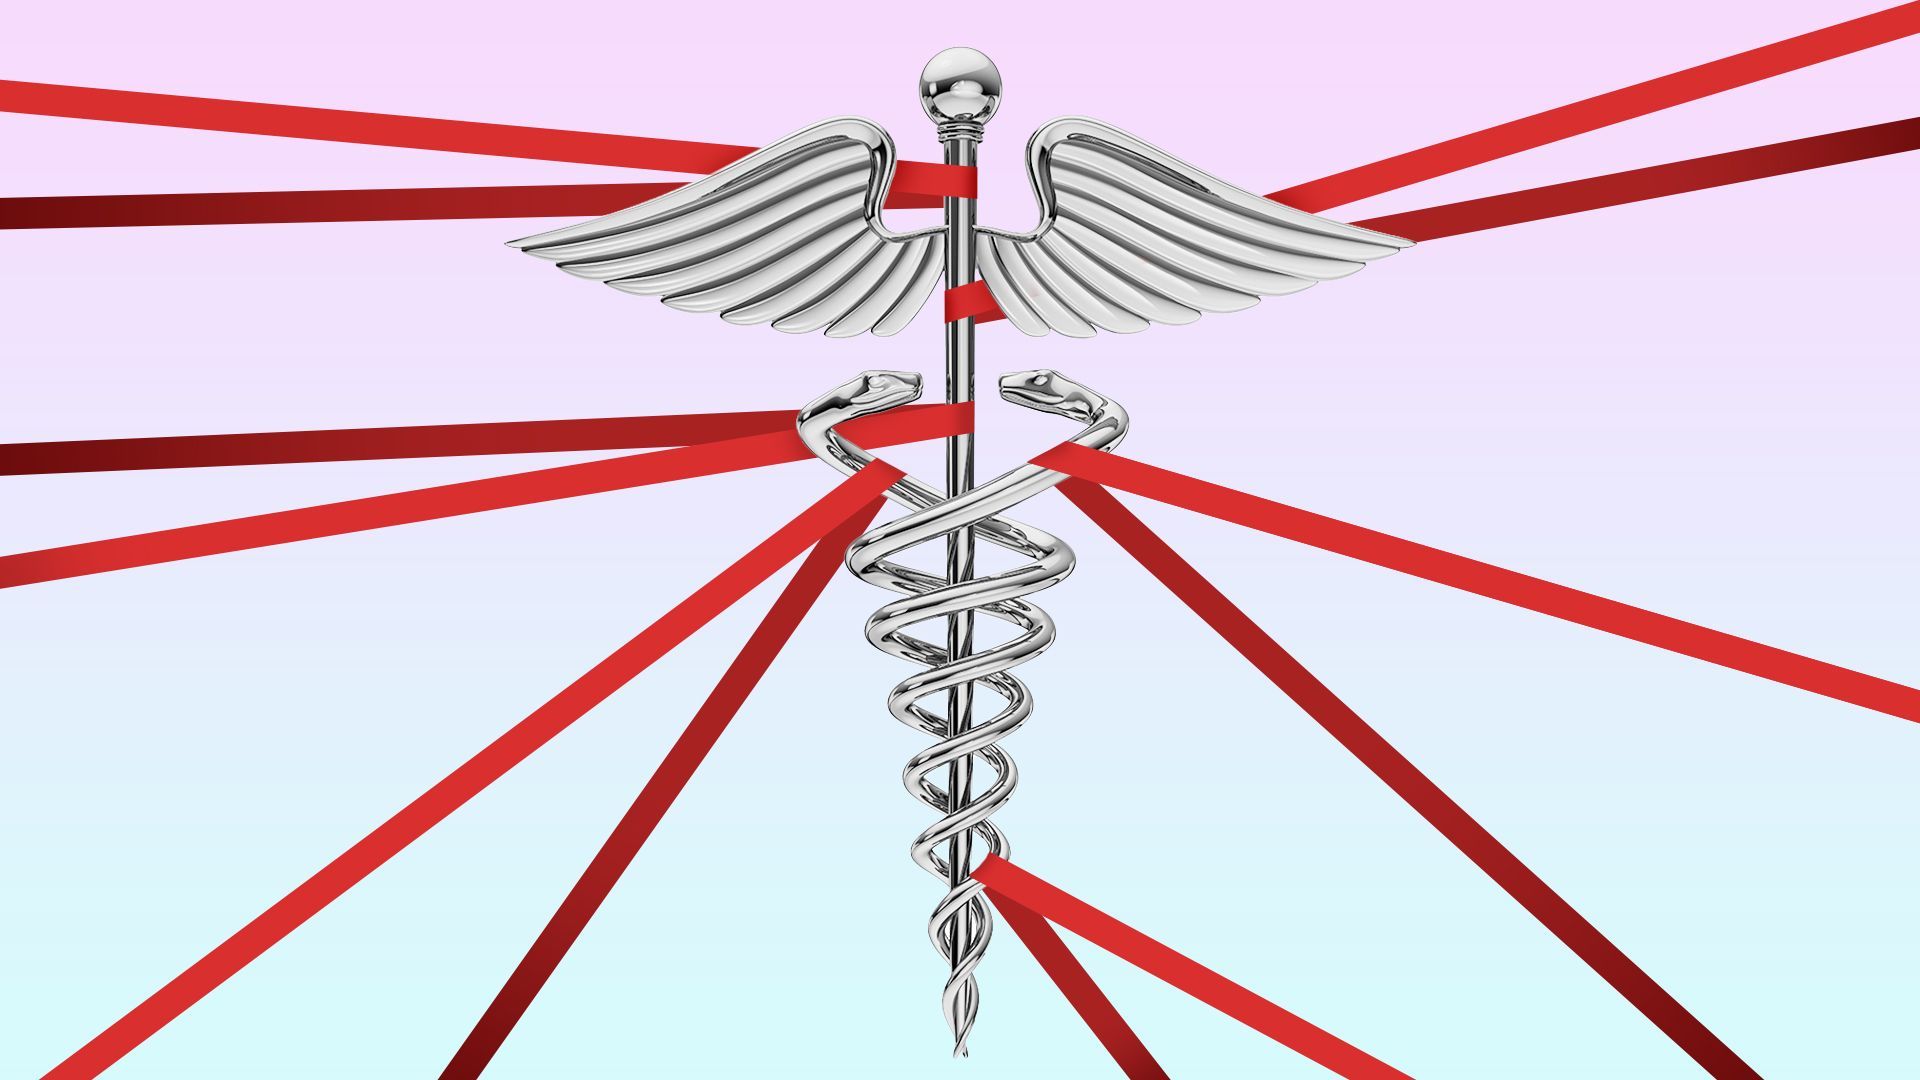 Illustration of a caduceus with red tape wrapped around it from all angles